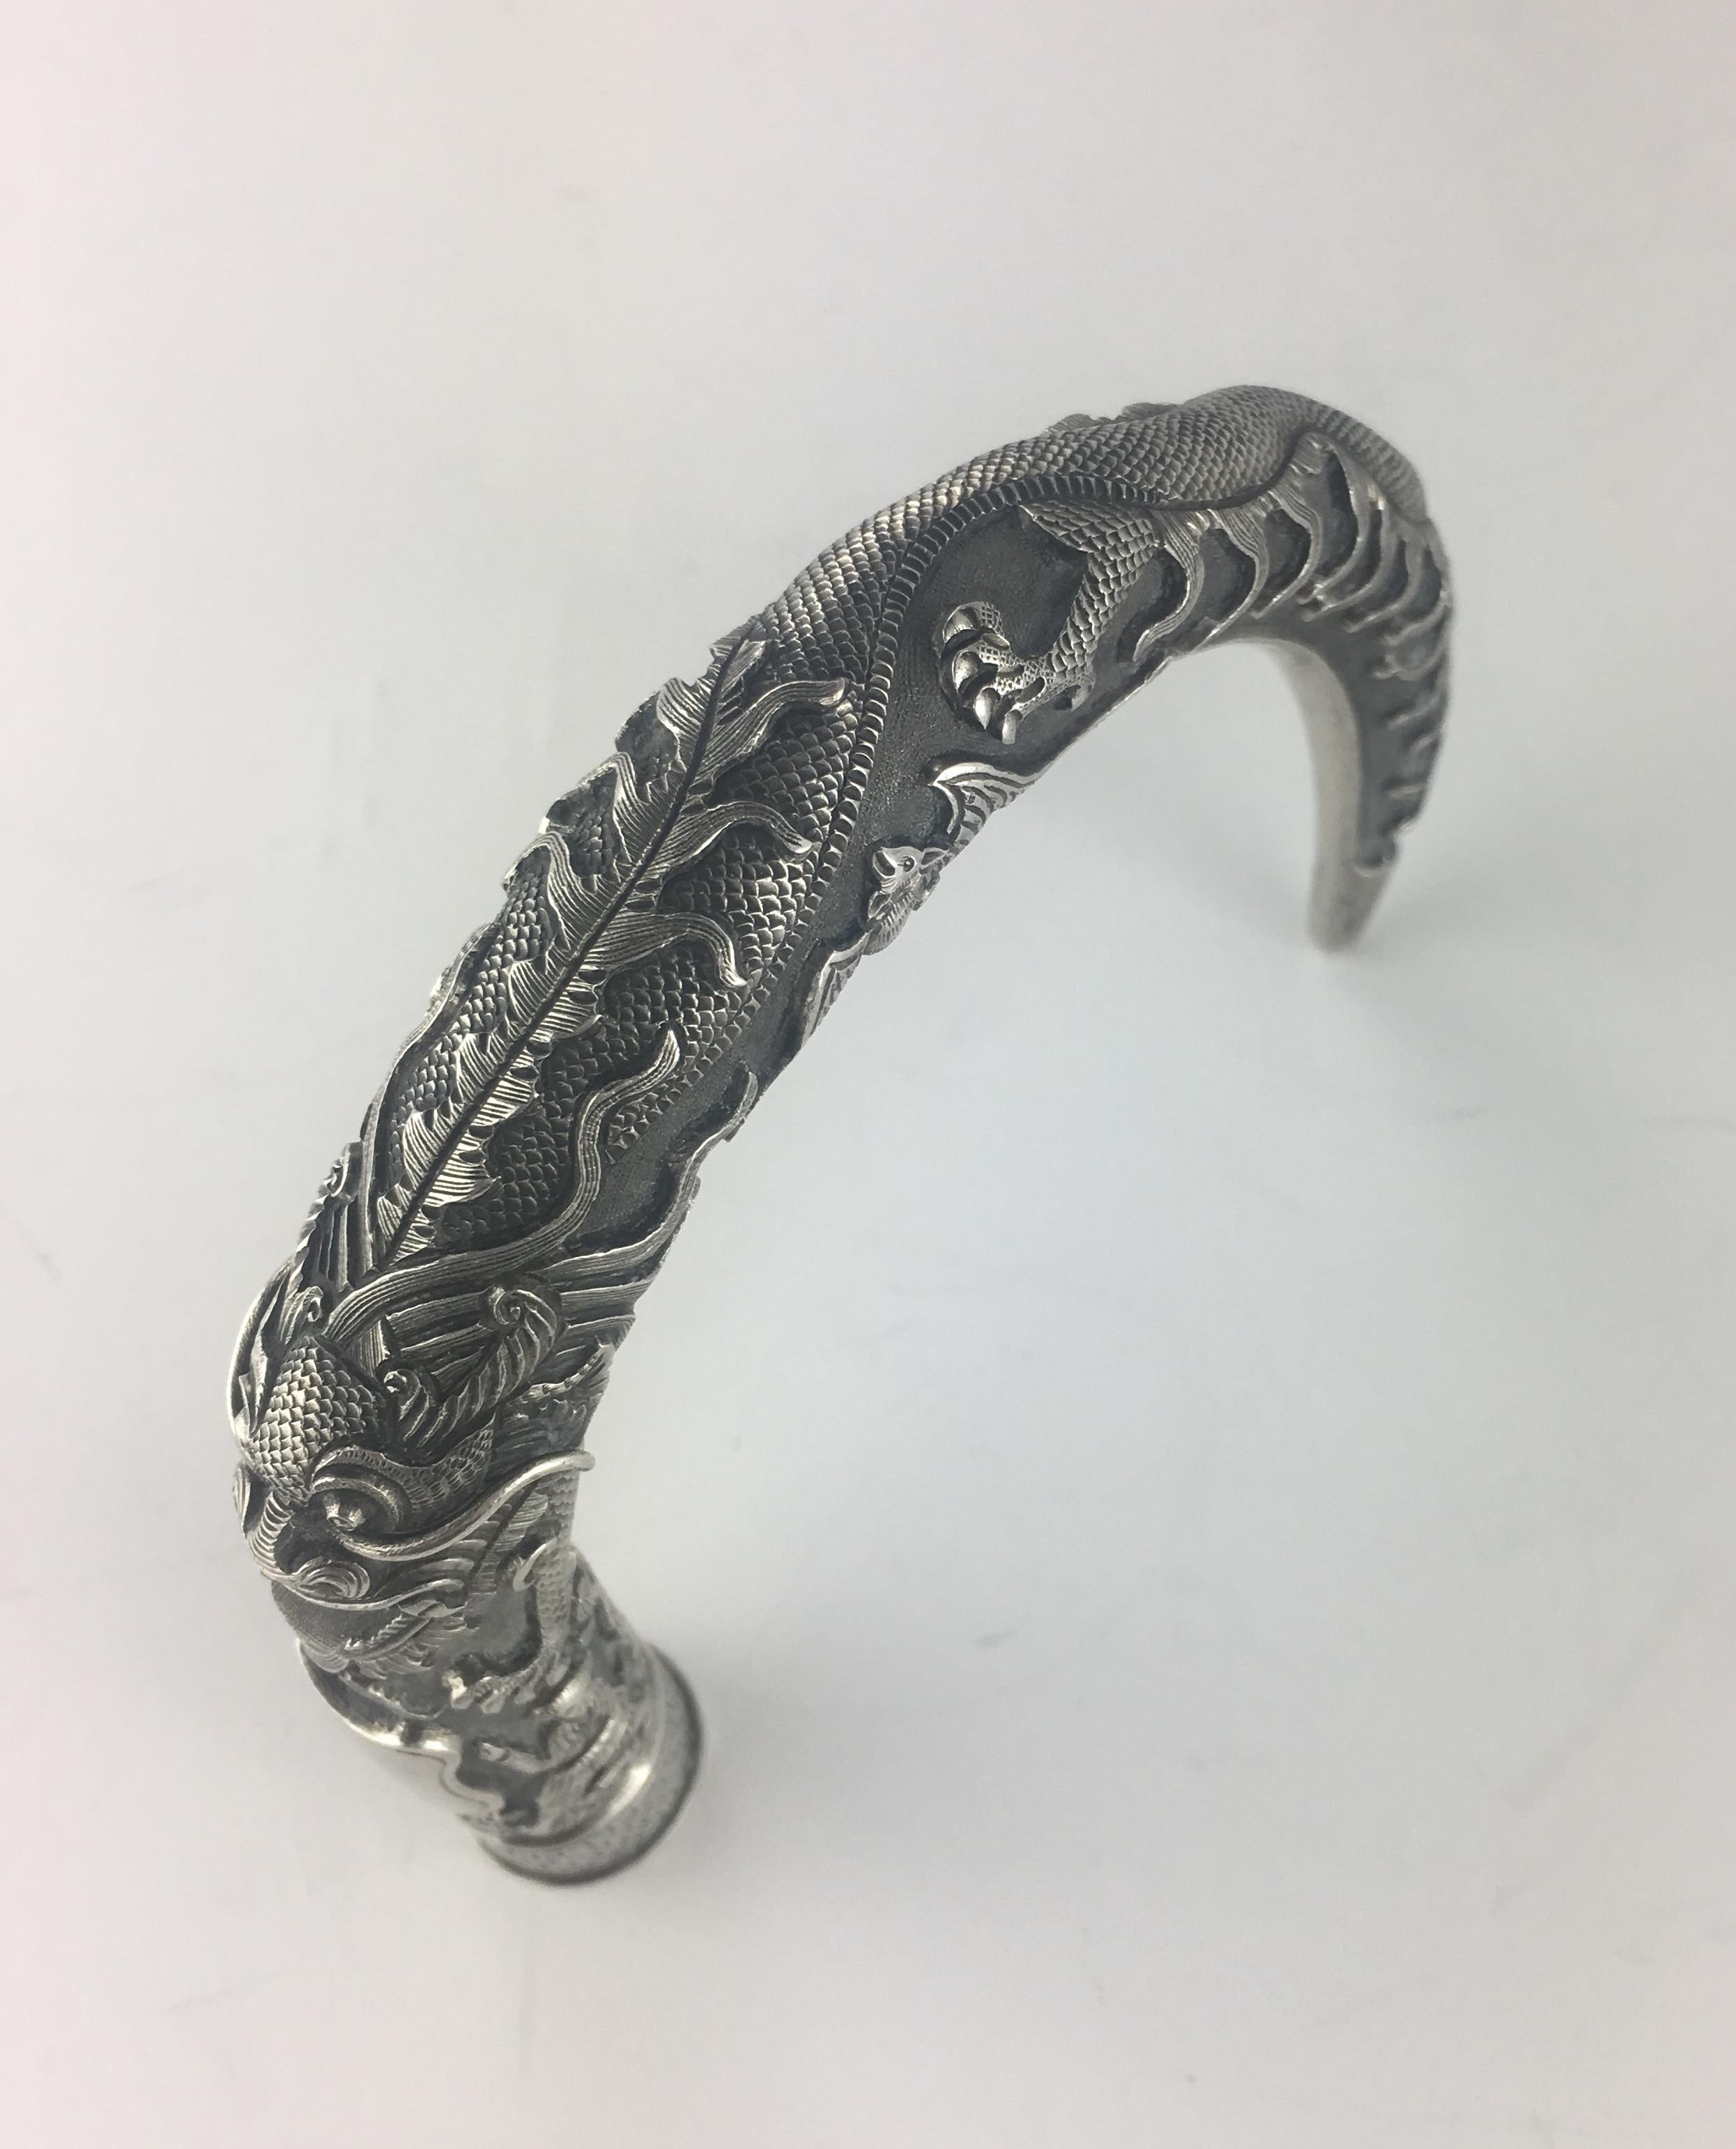 A fine French silver cane handle with a chinoiserie motif. Featuring elegant curved forms with stylized scrolling, dragon and other accents.
In excellent condition and very good quality.
Area on the front leaves space for a monogram.

I believe this